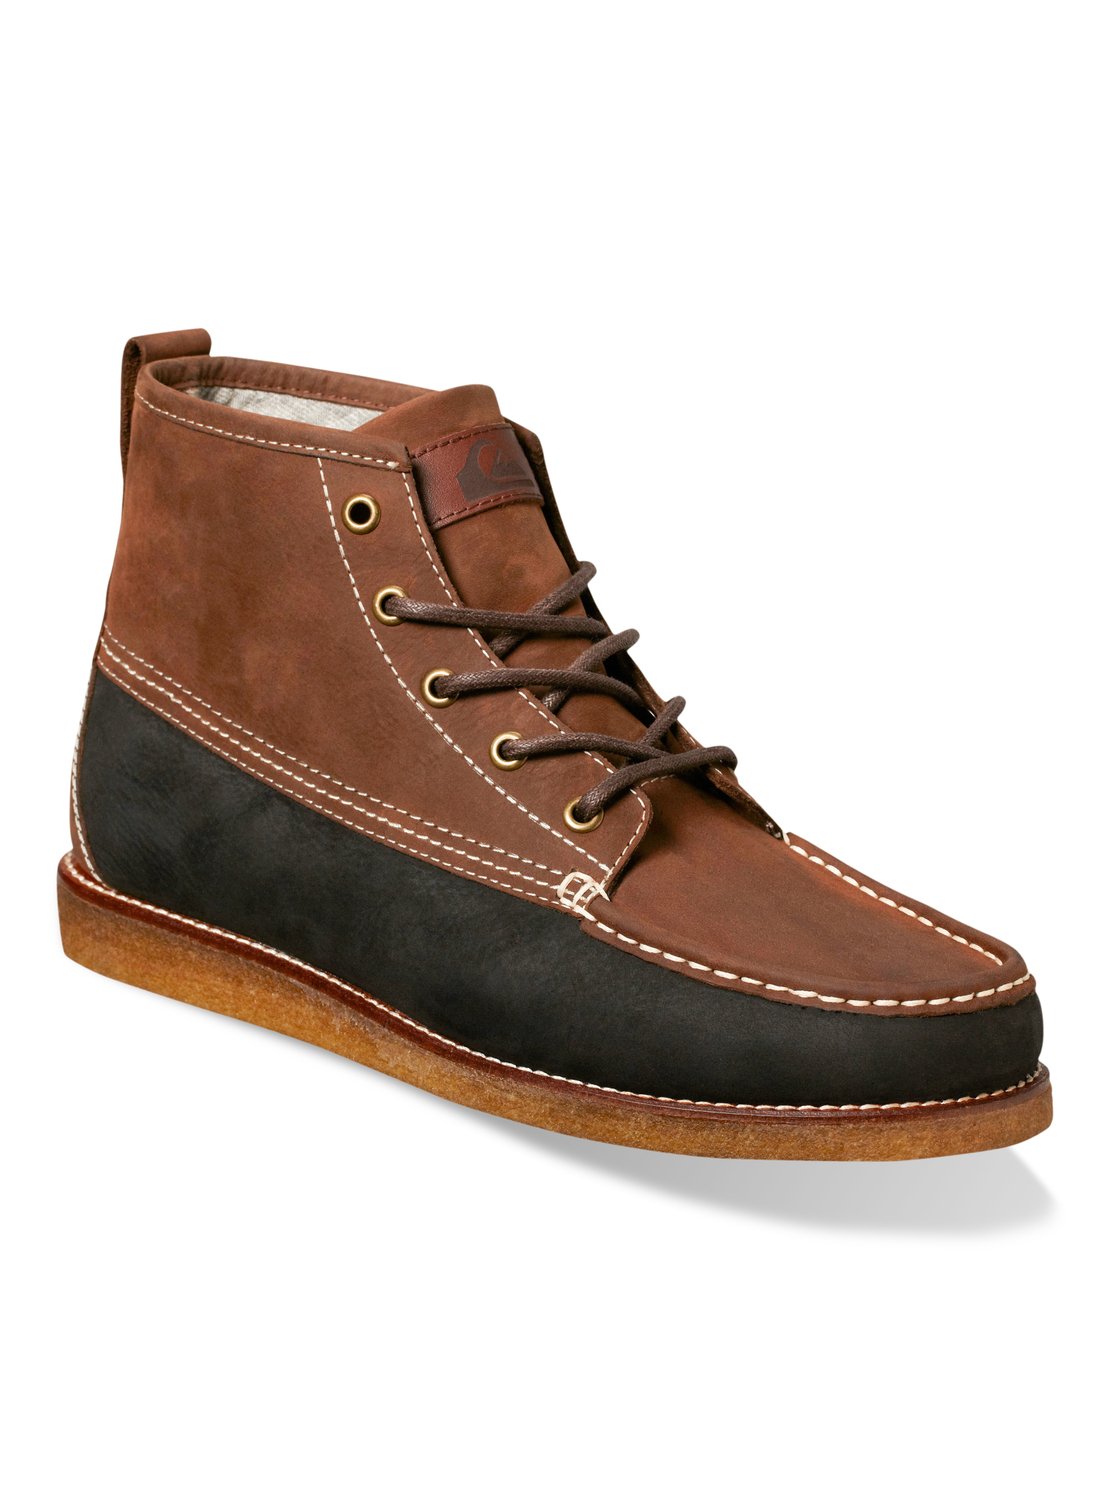 Transom Boot GQYB700005 | Quiksilver